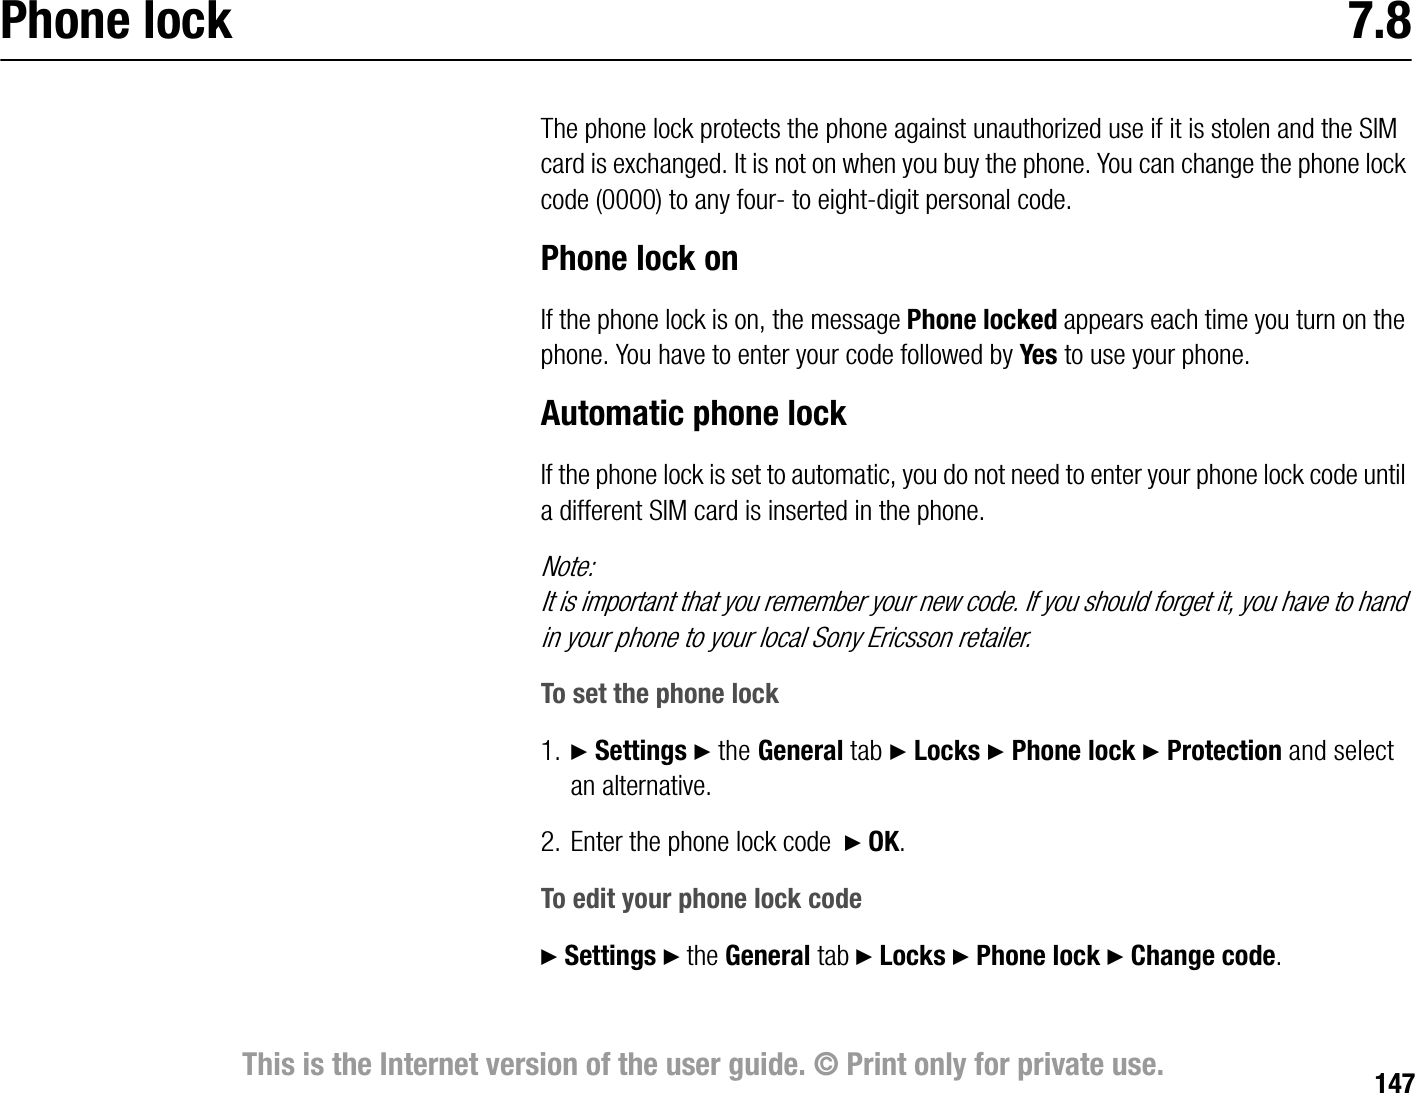 147This is the Internet version of the user guide. © Print only for private use.Phone lock 7.8The phone lock protects the phone against unauthorized use if it is stolen and the SIM card is exchanged. It is not on when you buy the phone. You can change the phone lock code (0000) to any four to eightdigit personal code.Phone lock onIf the phone lock is on, the message Phone locked appears each time you turn on the phone. You have to enter your code followed by Yes to use your phone.Automatic phone lockIf the phone lock is set to automatic, you do not need to enter your phone lock code until a different SIM card is inserted in the phone.Note:It is important that you remember your new code. If you should forget it, you have to hand in your phone to your local Sony Ericsson retailer.To set the phone lock1. } Settings } the General tab } Locks } Phone lock } Protection and select an alternative.2. Enter the phone lock code  } OK.To edit your phone lock code} Settings } the General tab } Locks } Phone lock } Change code.